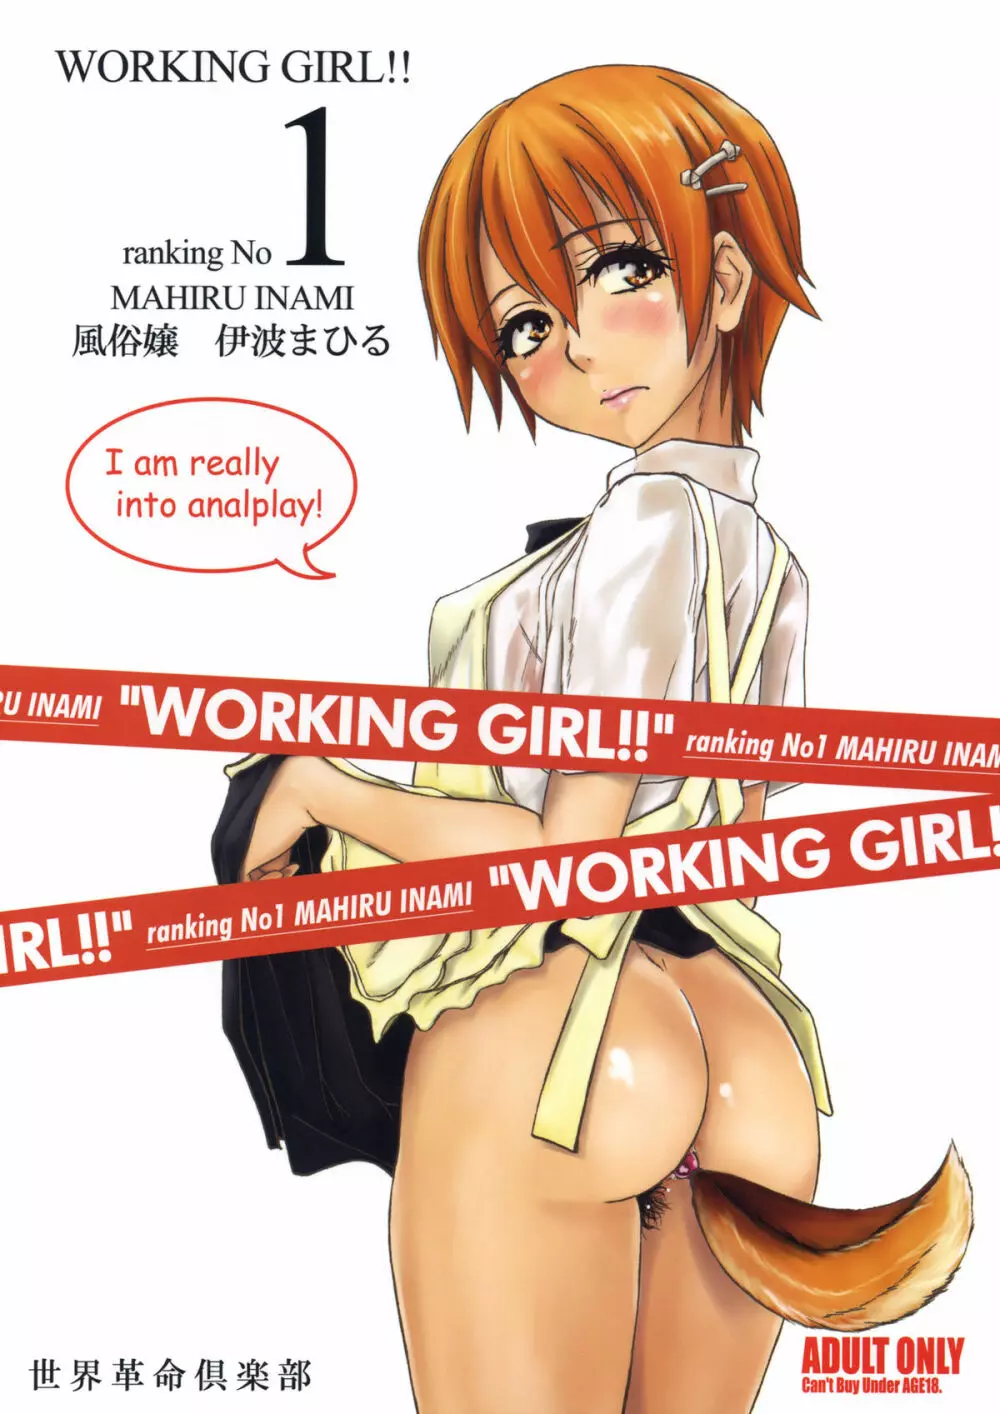 WORKING GIRL!! ranking No 1 風俗嬢 伊波まひる - page1